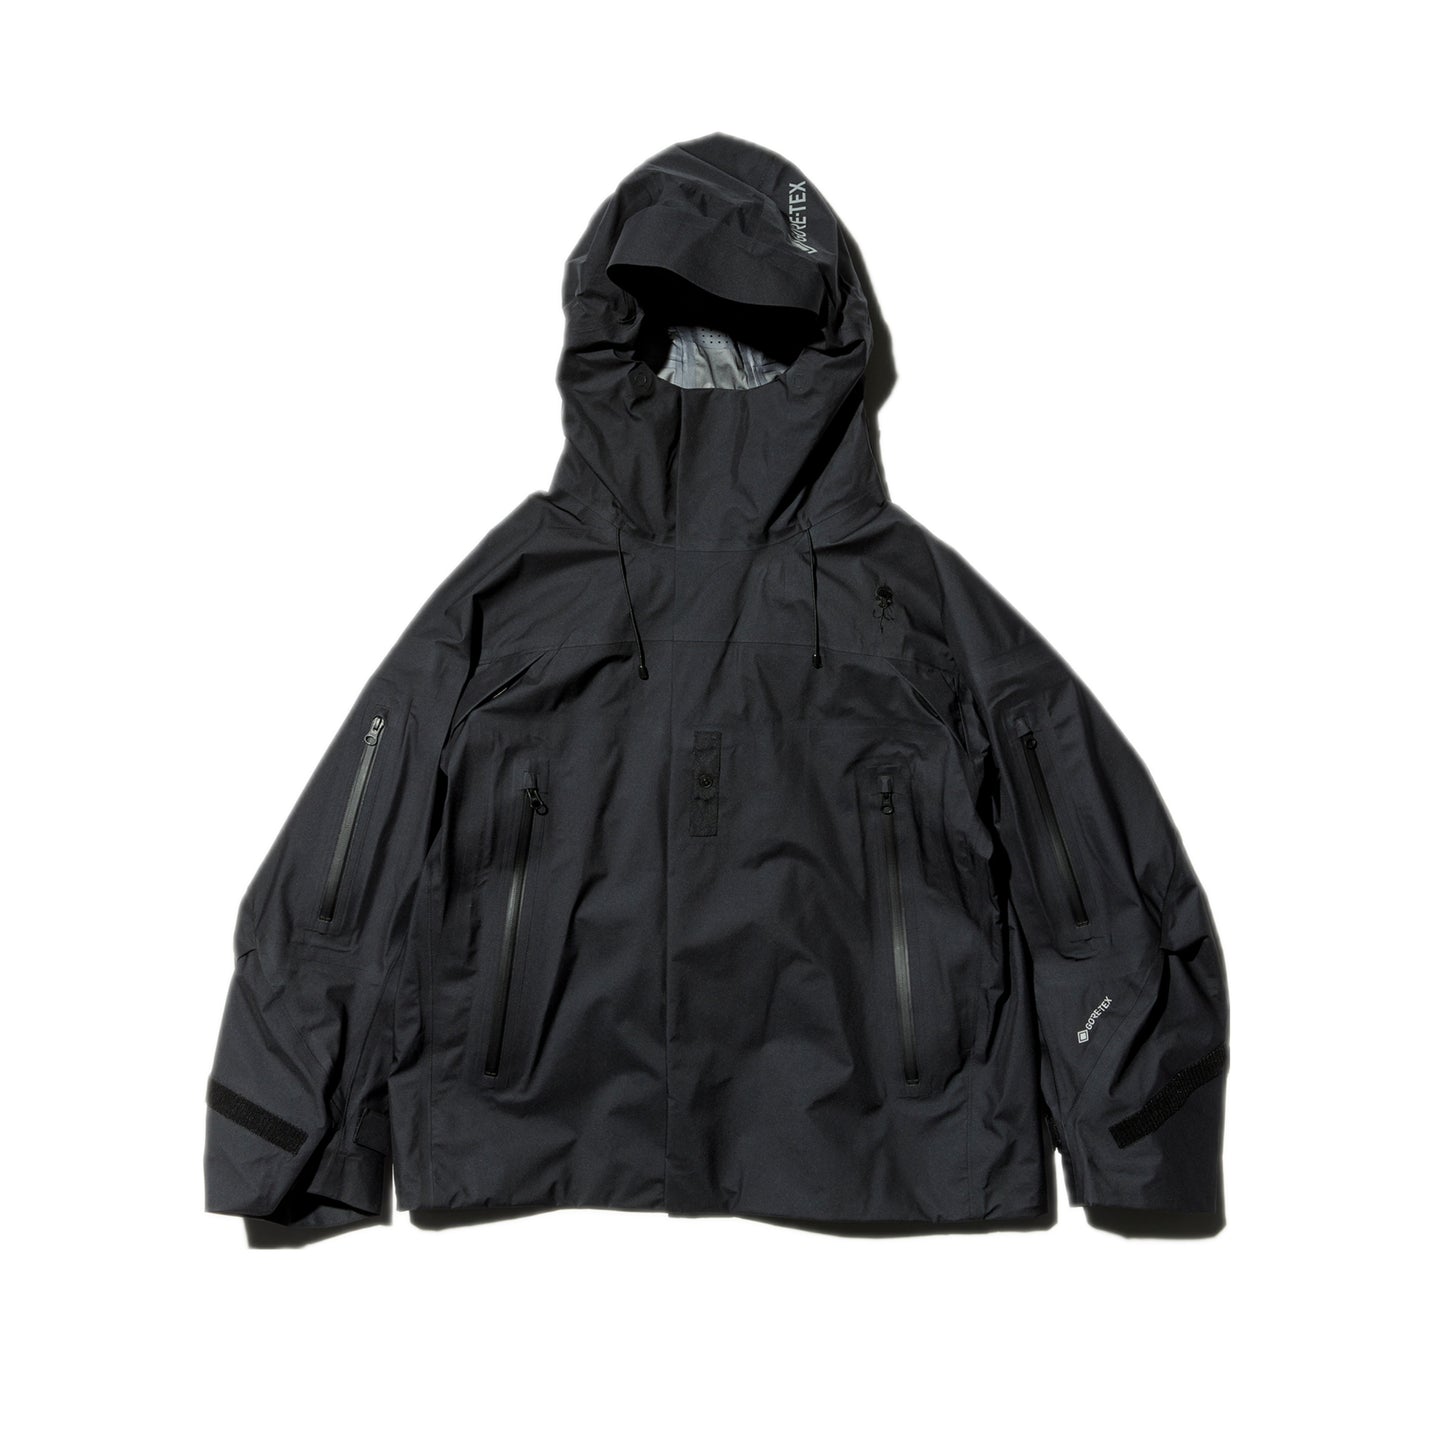 GORE-TEX PRODUCT SHELL